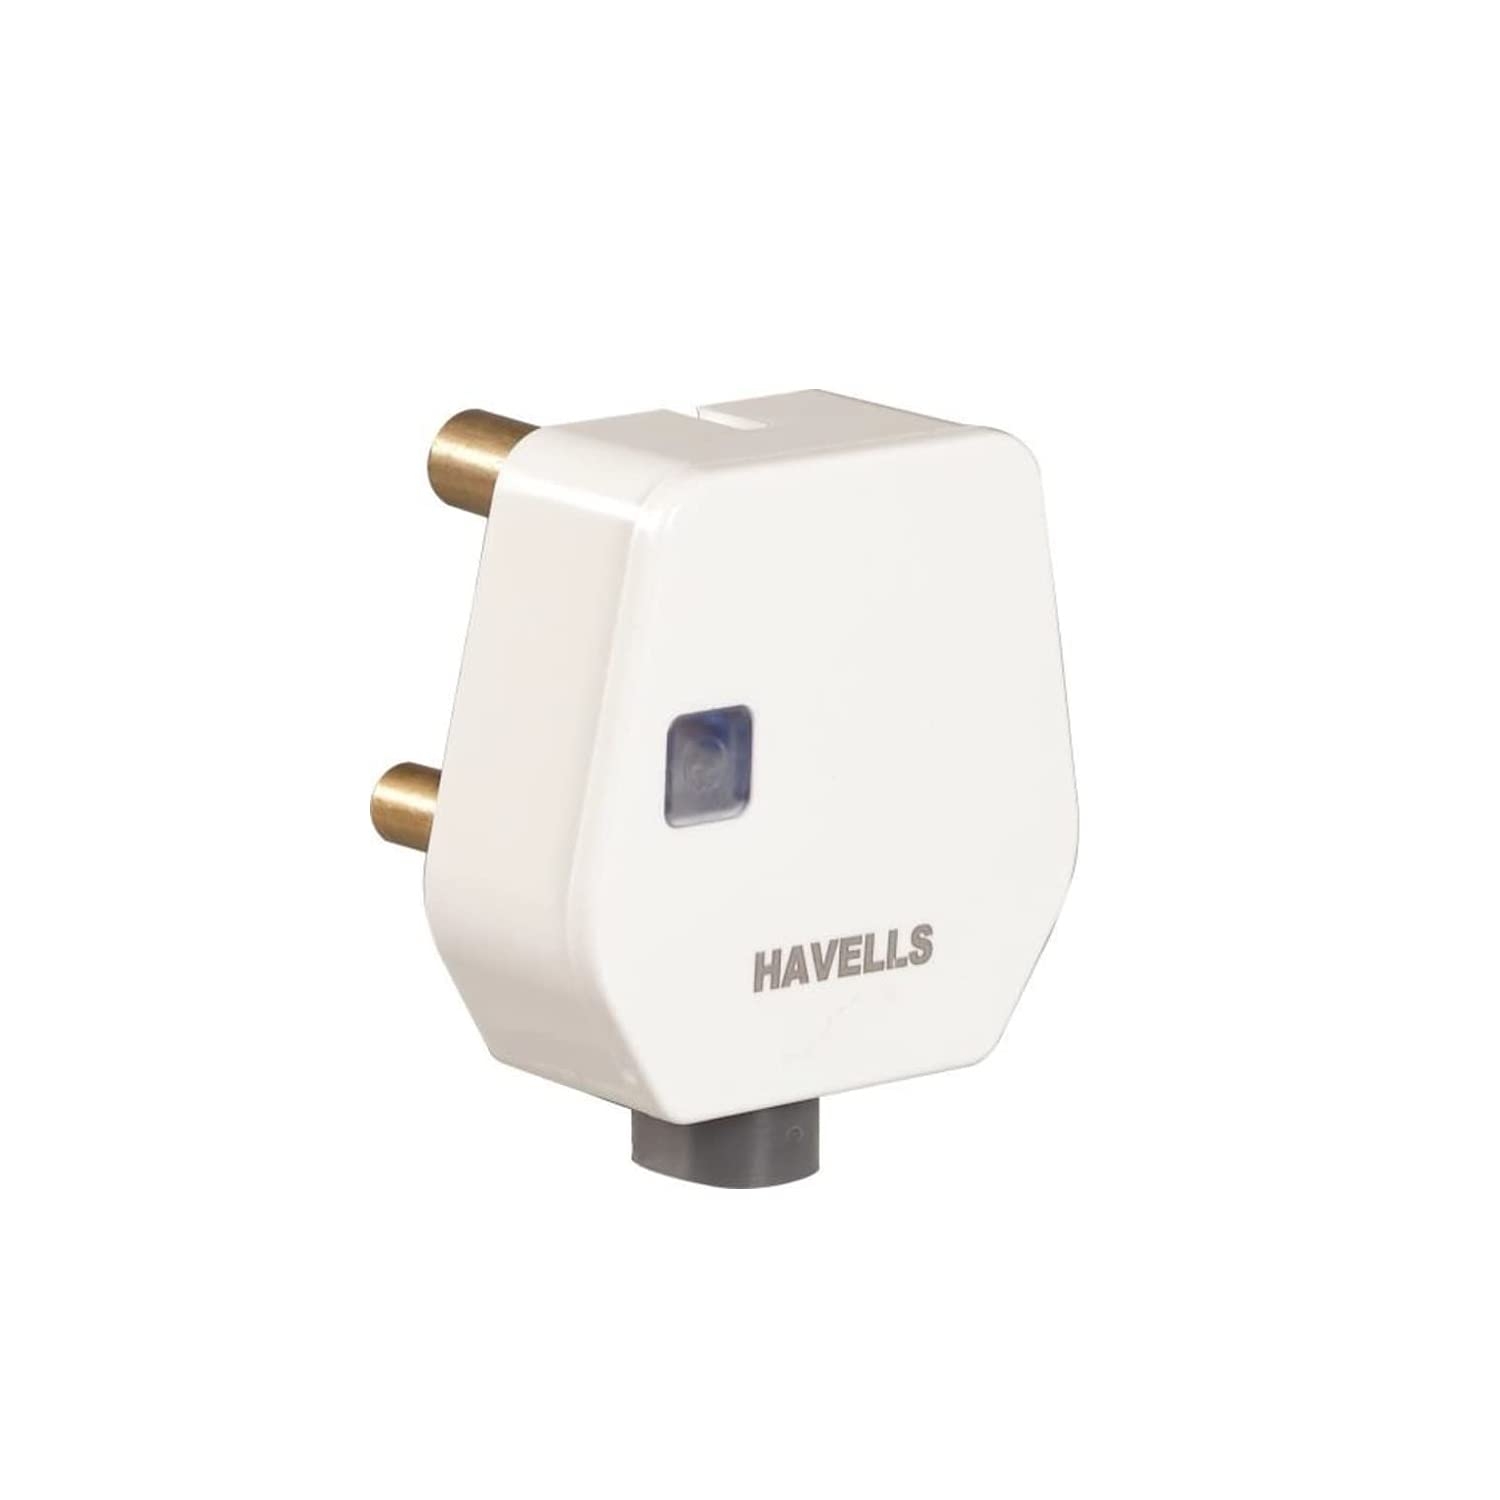 Havells AHLGWXW063 6A 3Pin Flat Plugtop with Indicator, white (1 pcs)